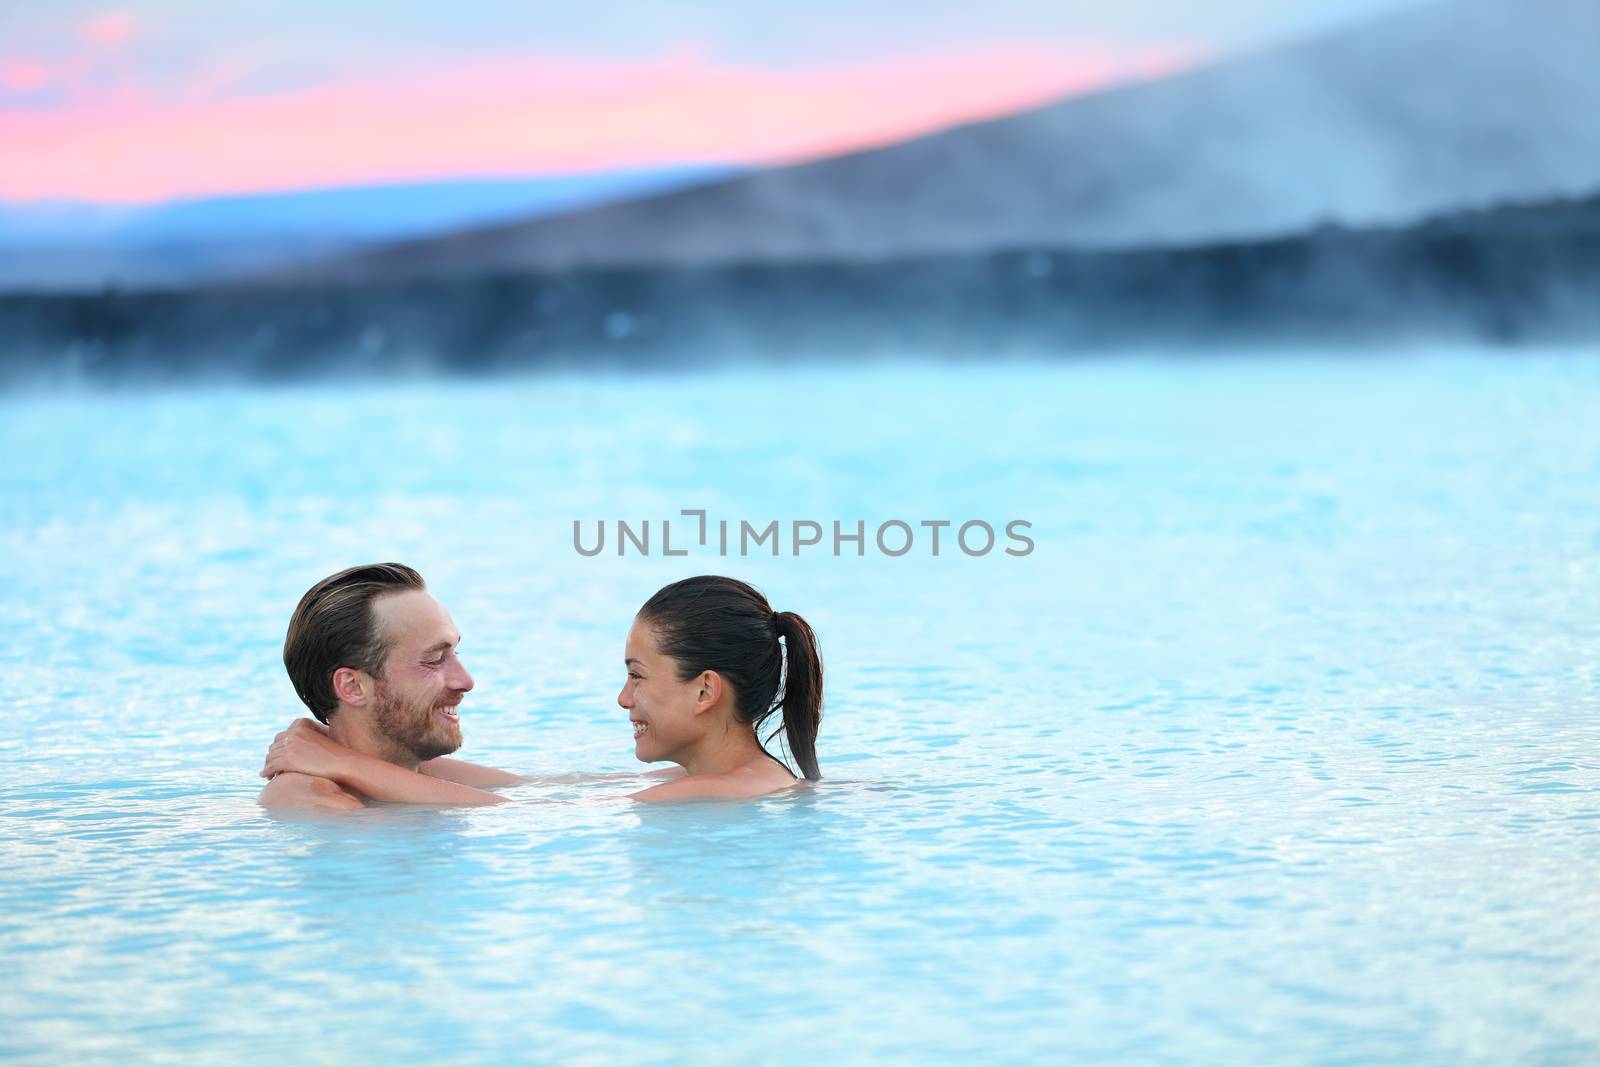 Hot spring geothermal spa on Iceland. Romantic couple in love relaxing in hot pool on Iceland. Young woman and man enjoying bathing relaxed in a blue water lagoon Icelandic tourist attraction. Sunset.